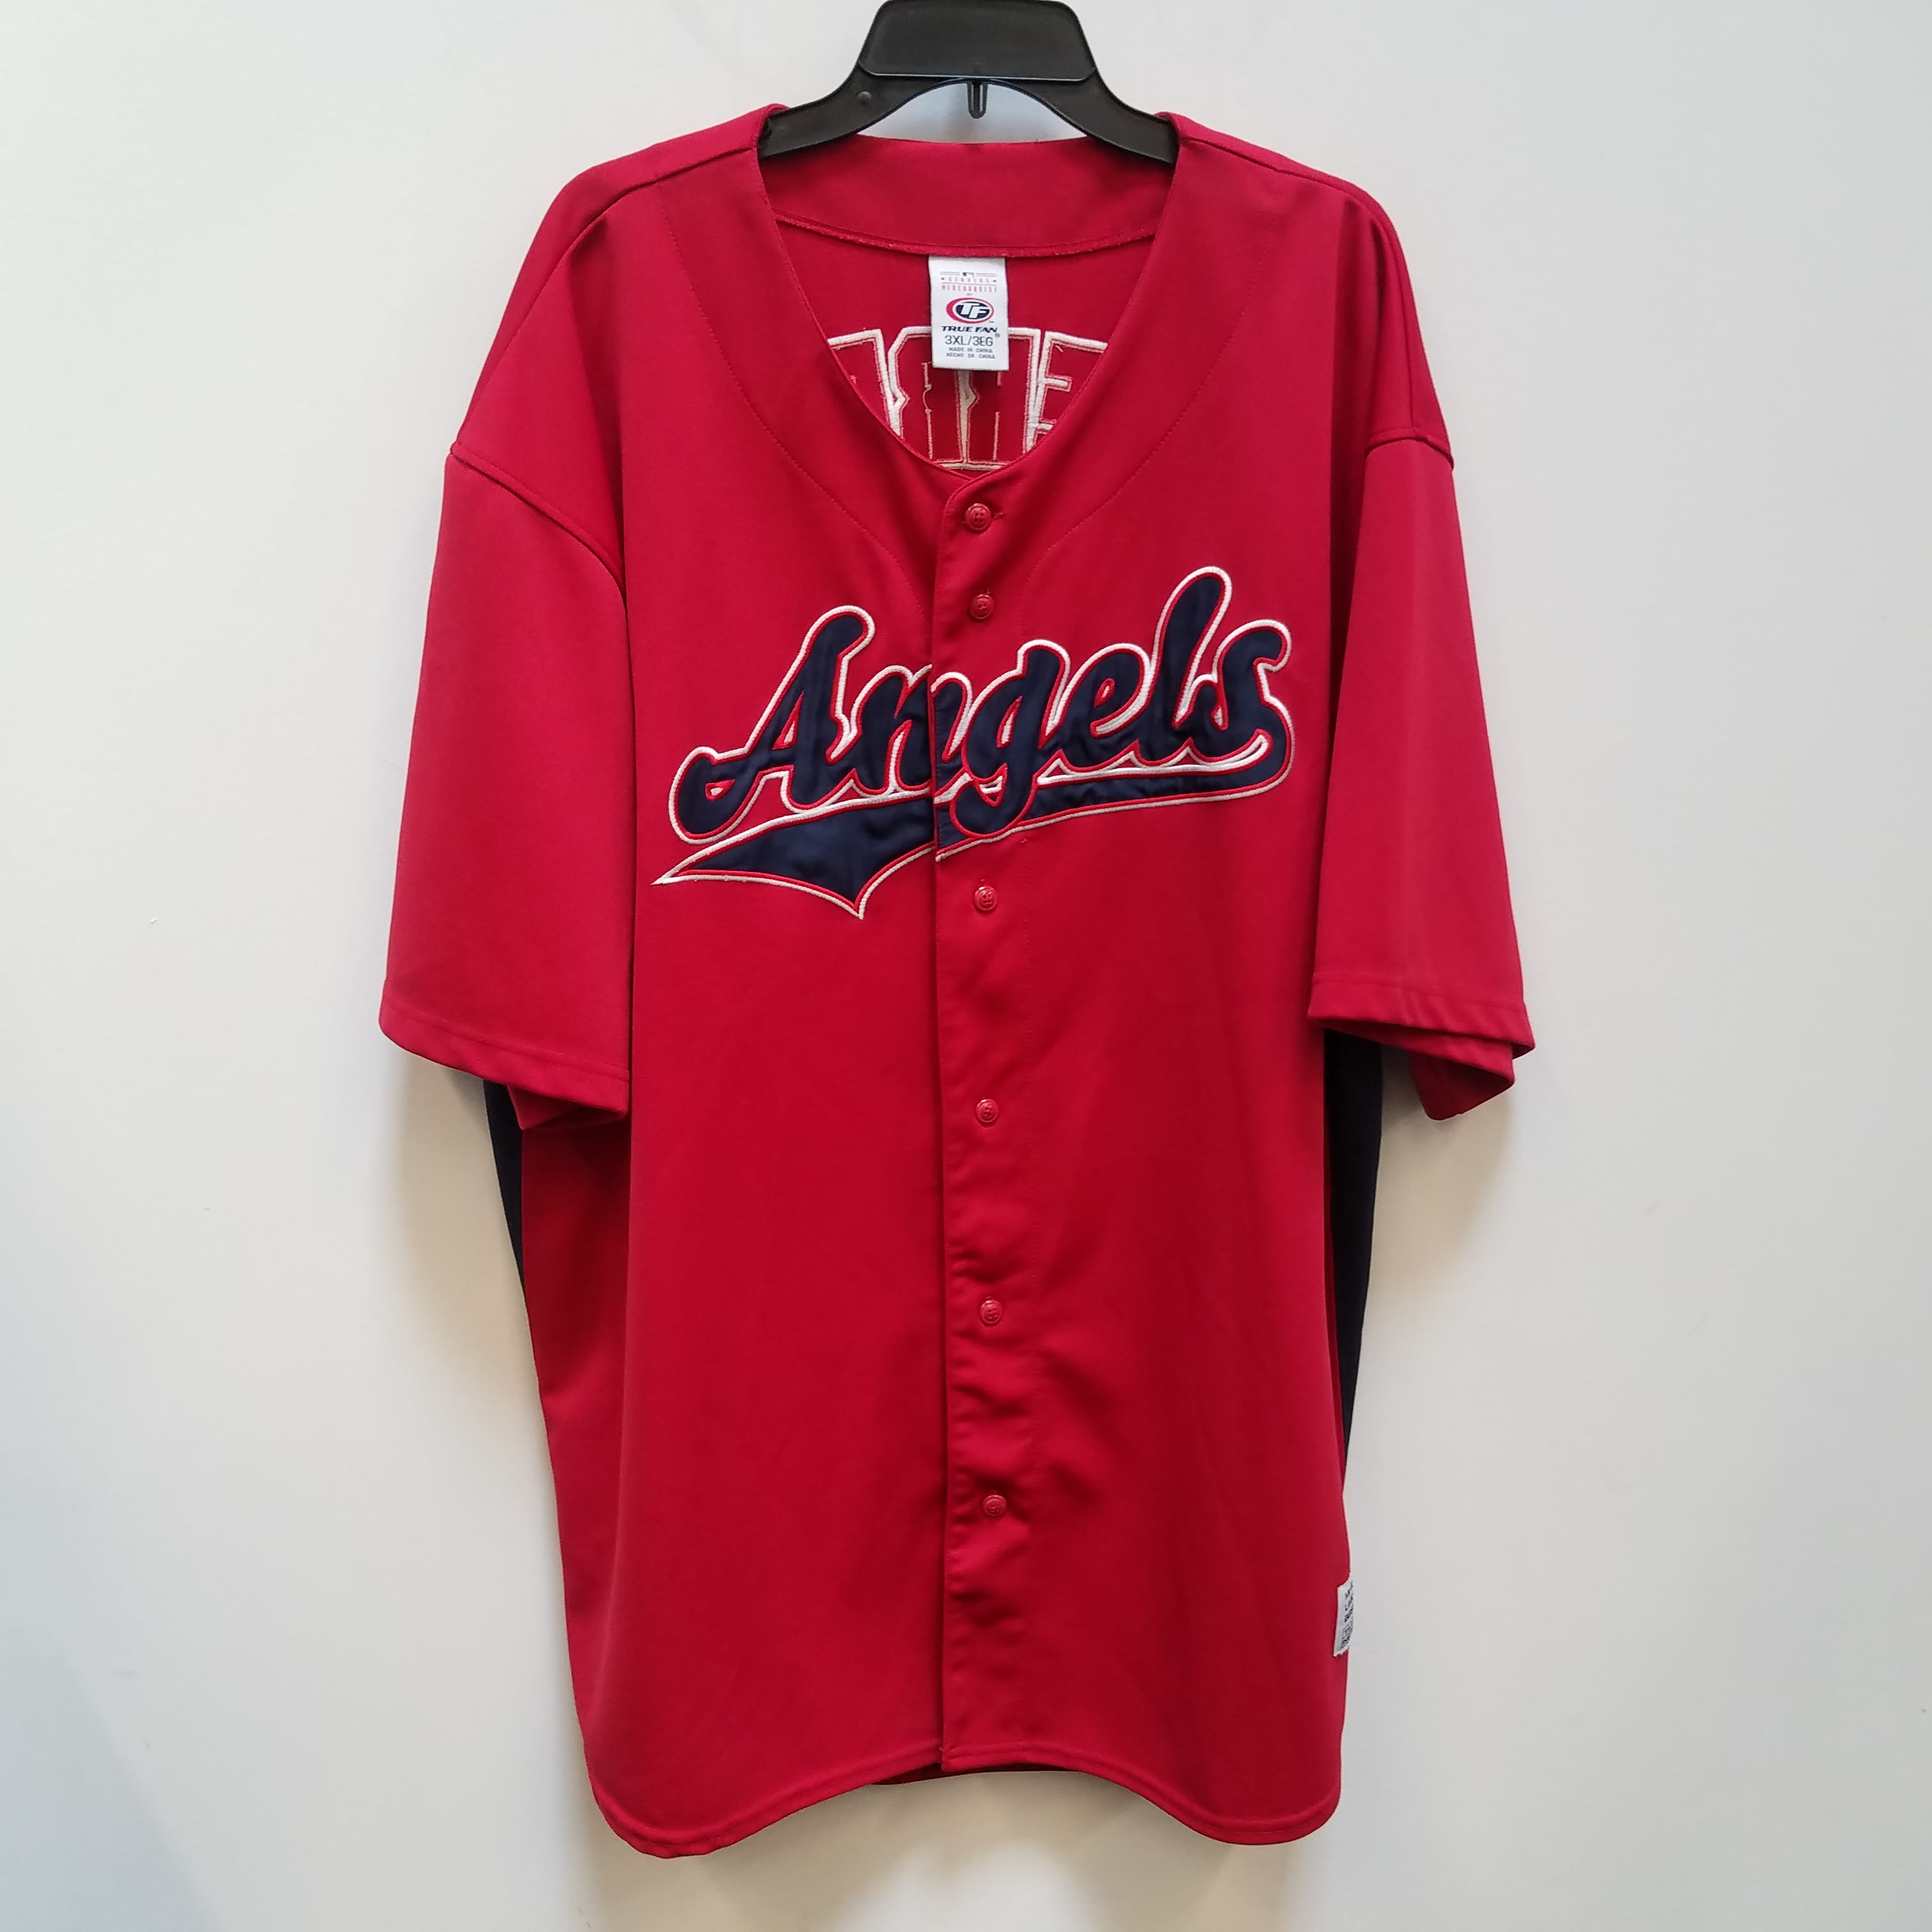 Angels Baseball Jersey #27 Guerrero by True Fan Size XL Red See Photos for  Wear